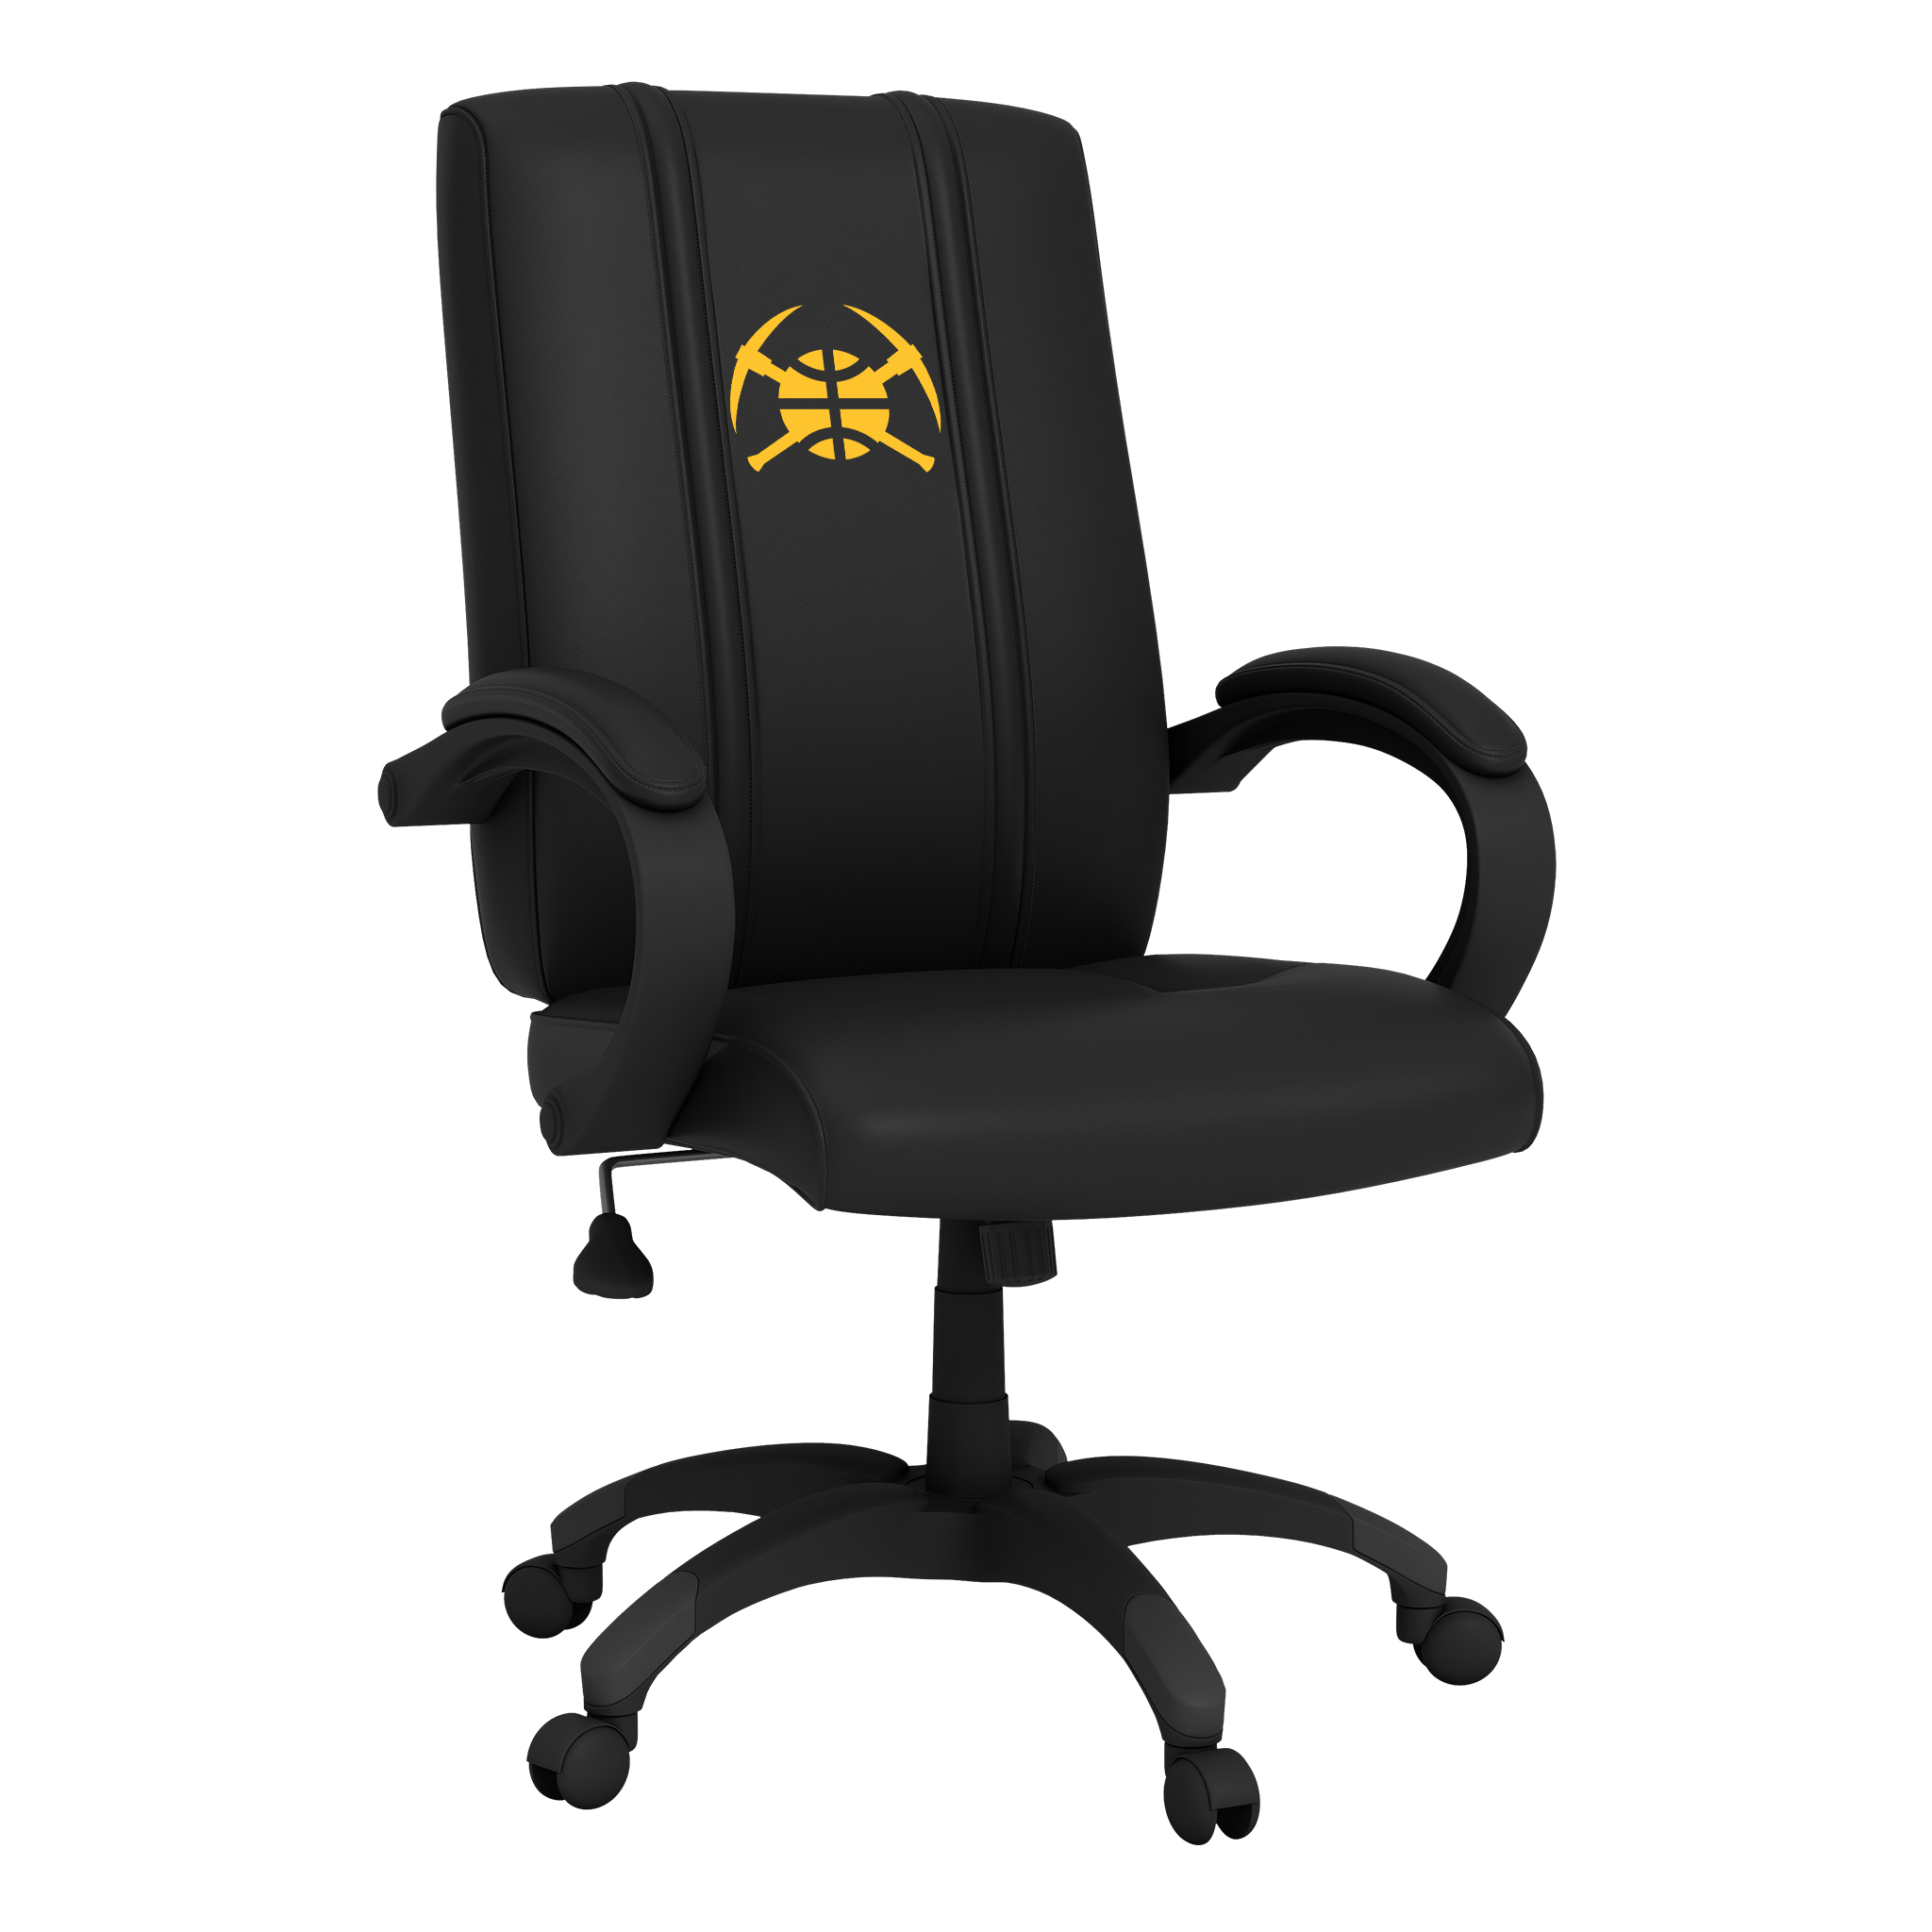 Denver Nuggets Office Chair 1000 with Denver Nuggets Secondary Logo